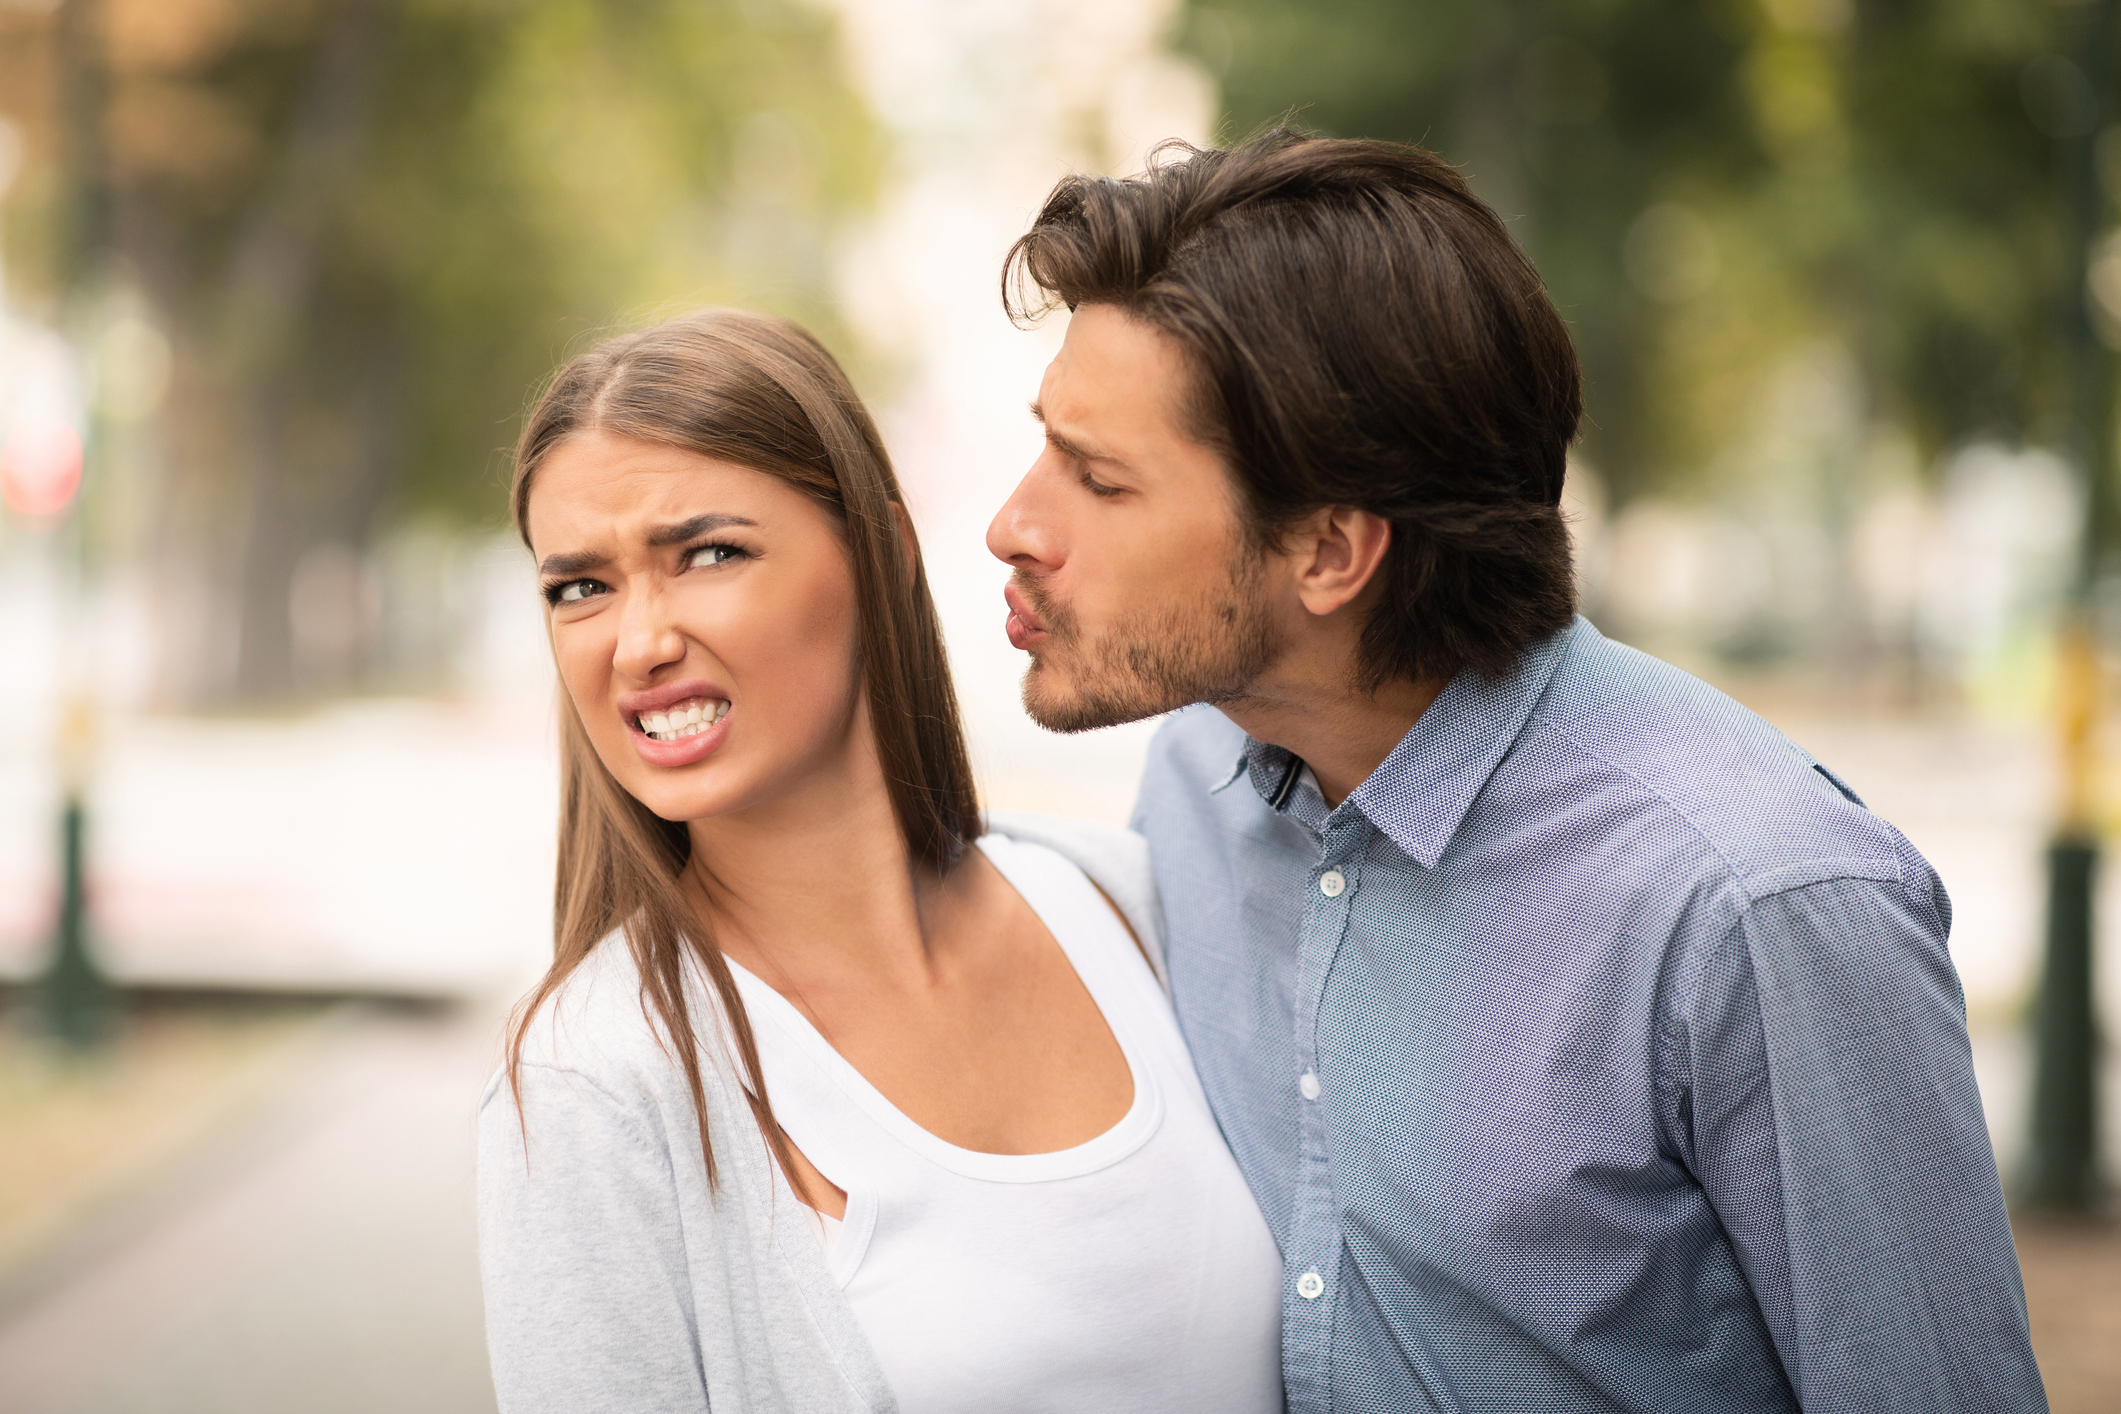 Red Flags to Out For When You're Dating Someone New